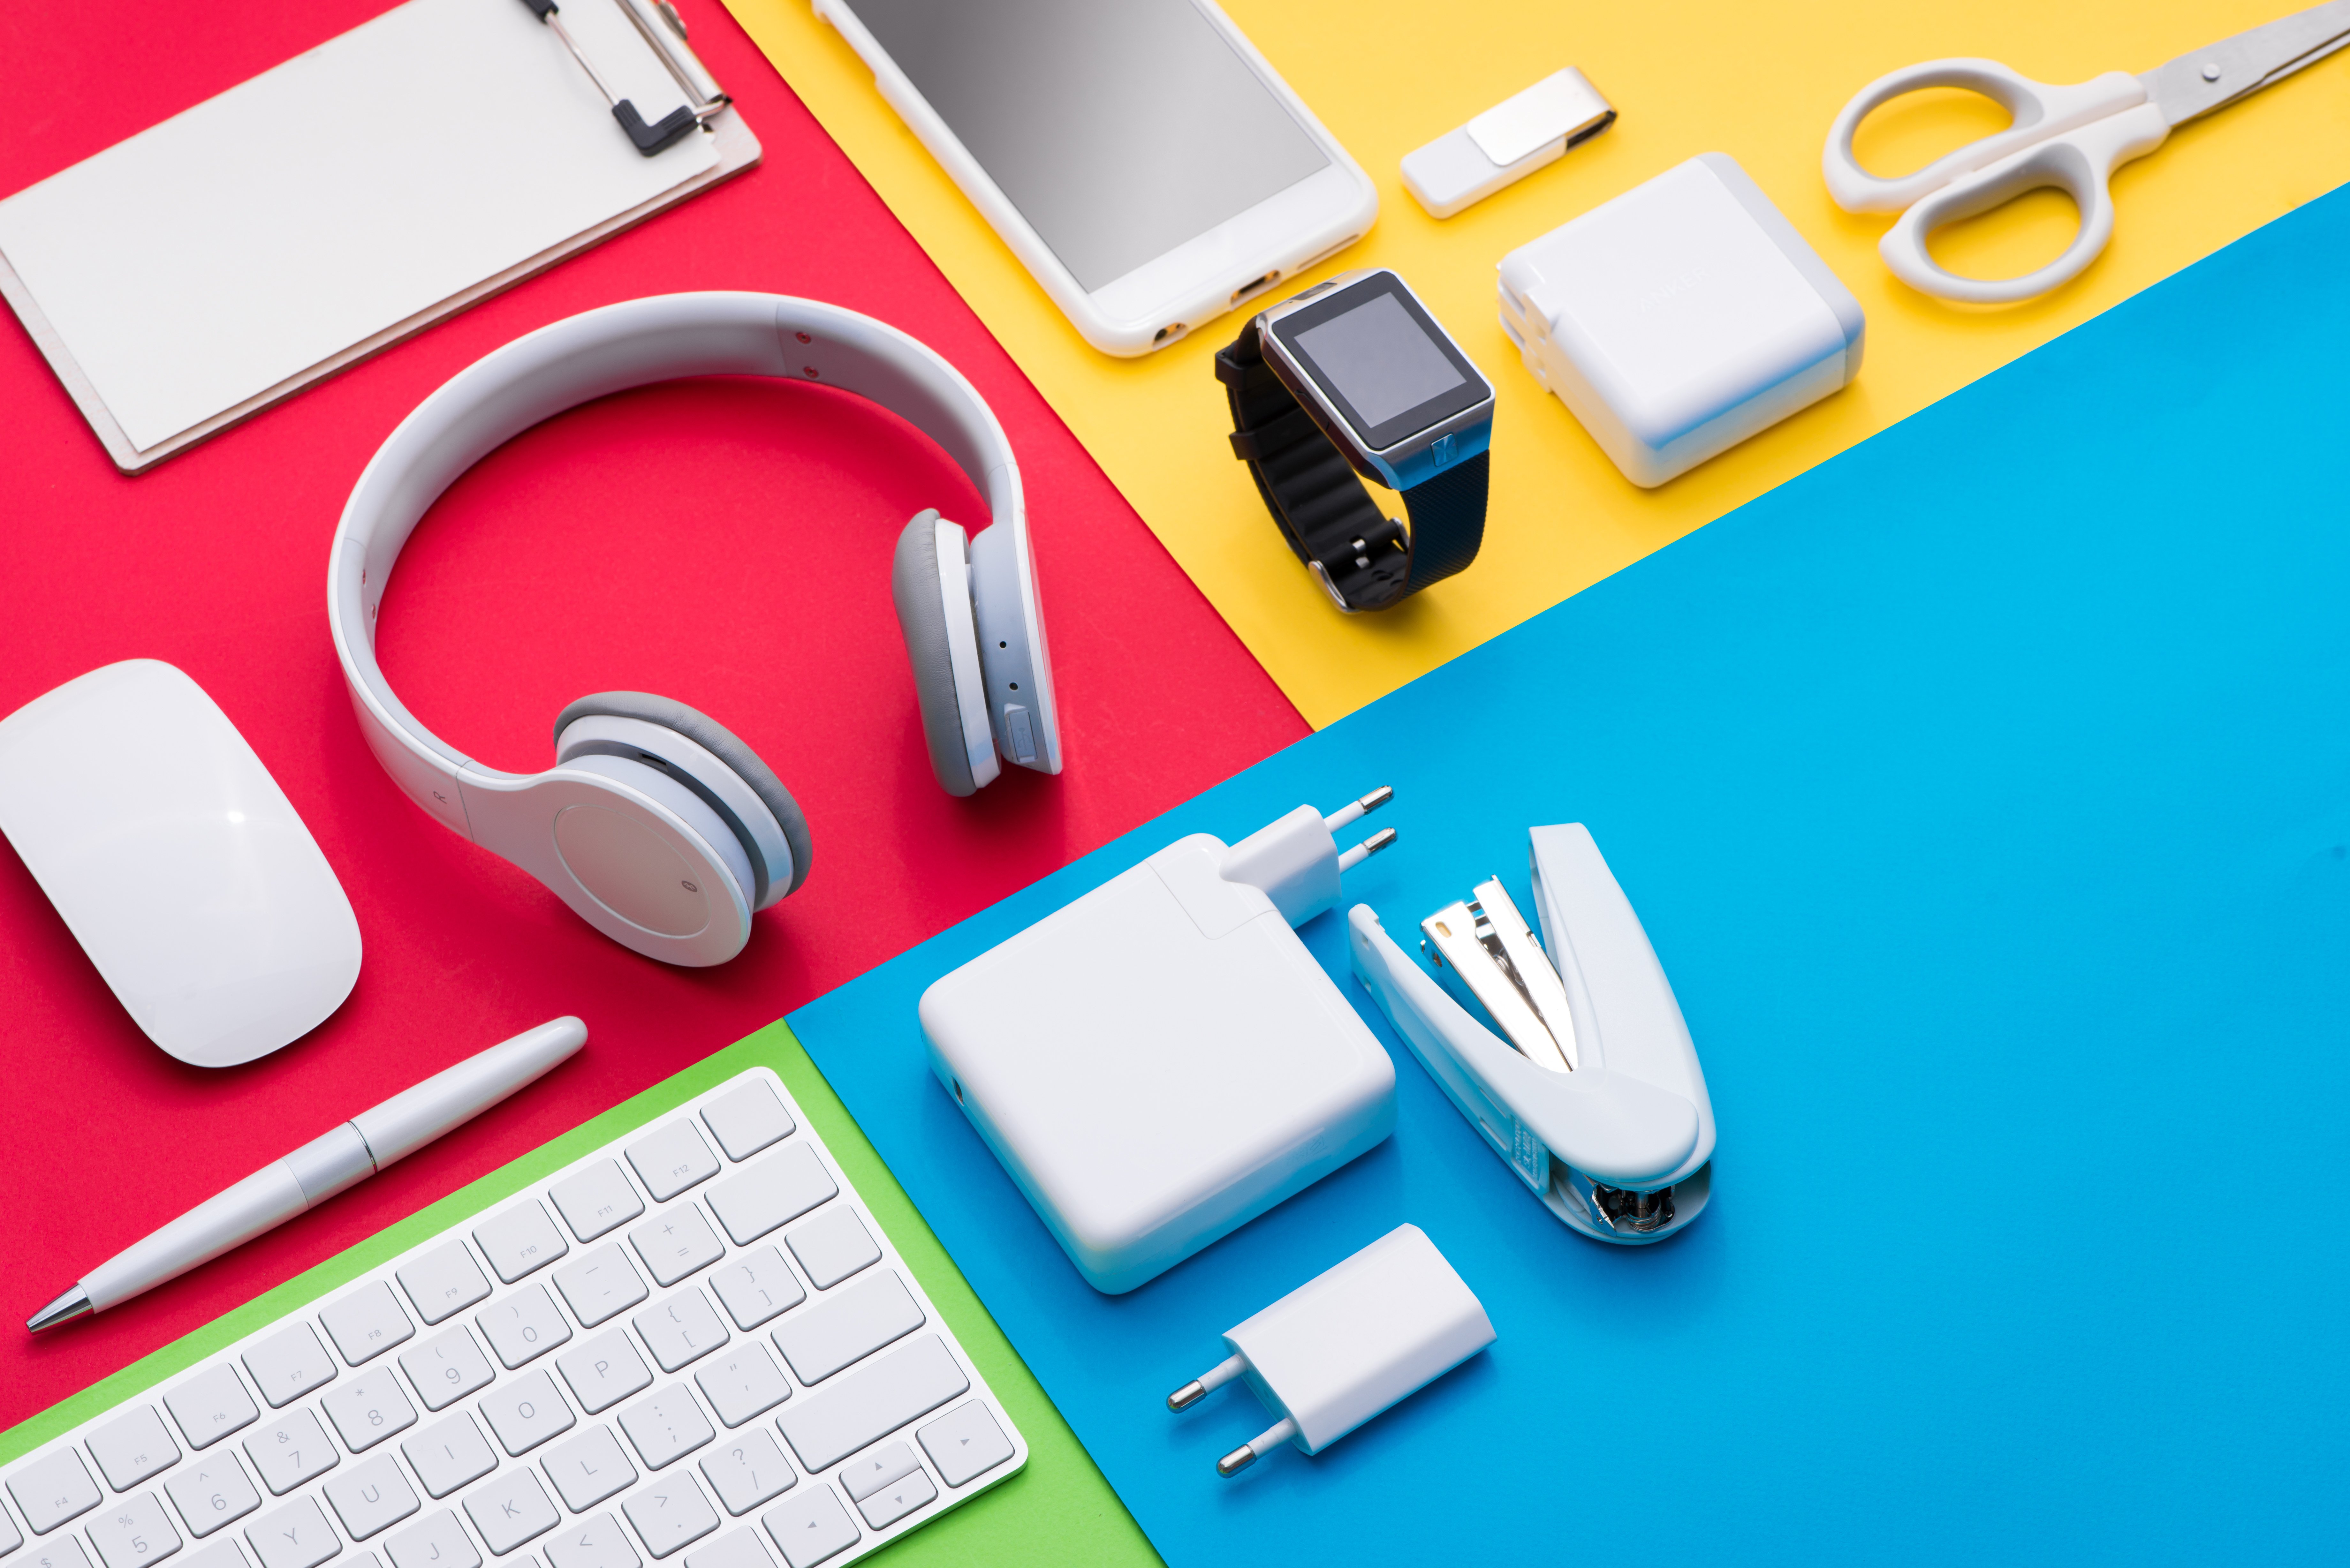 Featured image: Colourful array of tech gadgets - FitzFavourites: Five Free Home-Schooling Resources